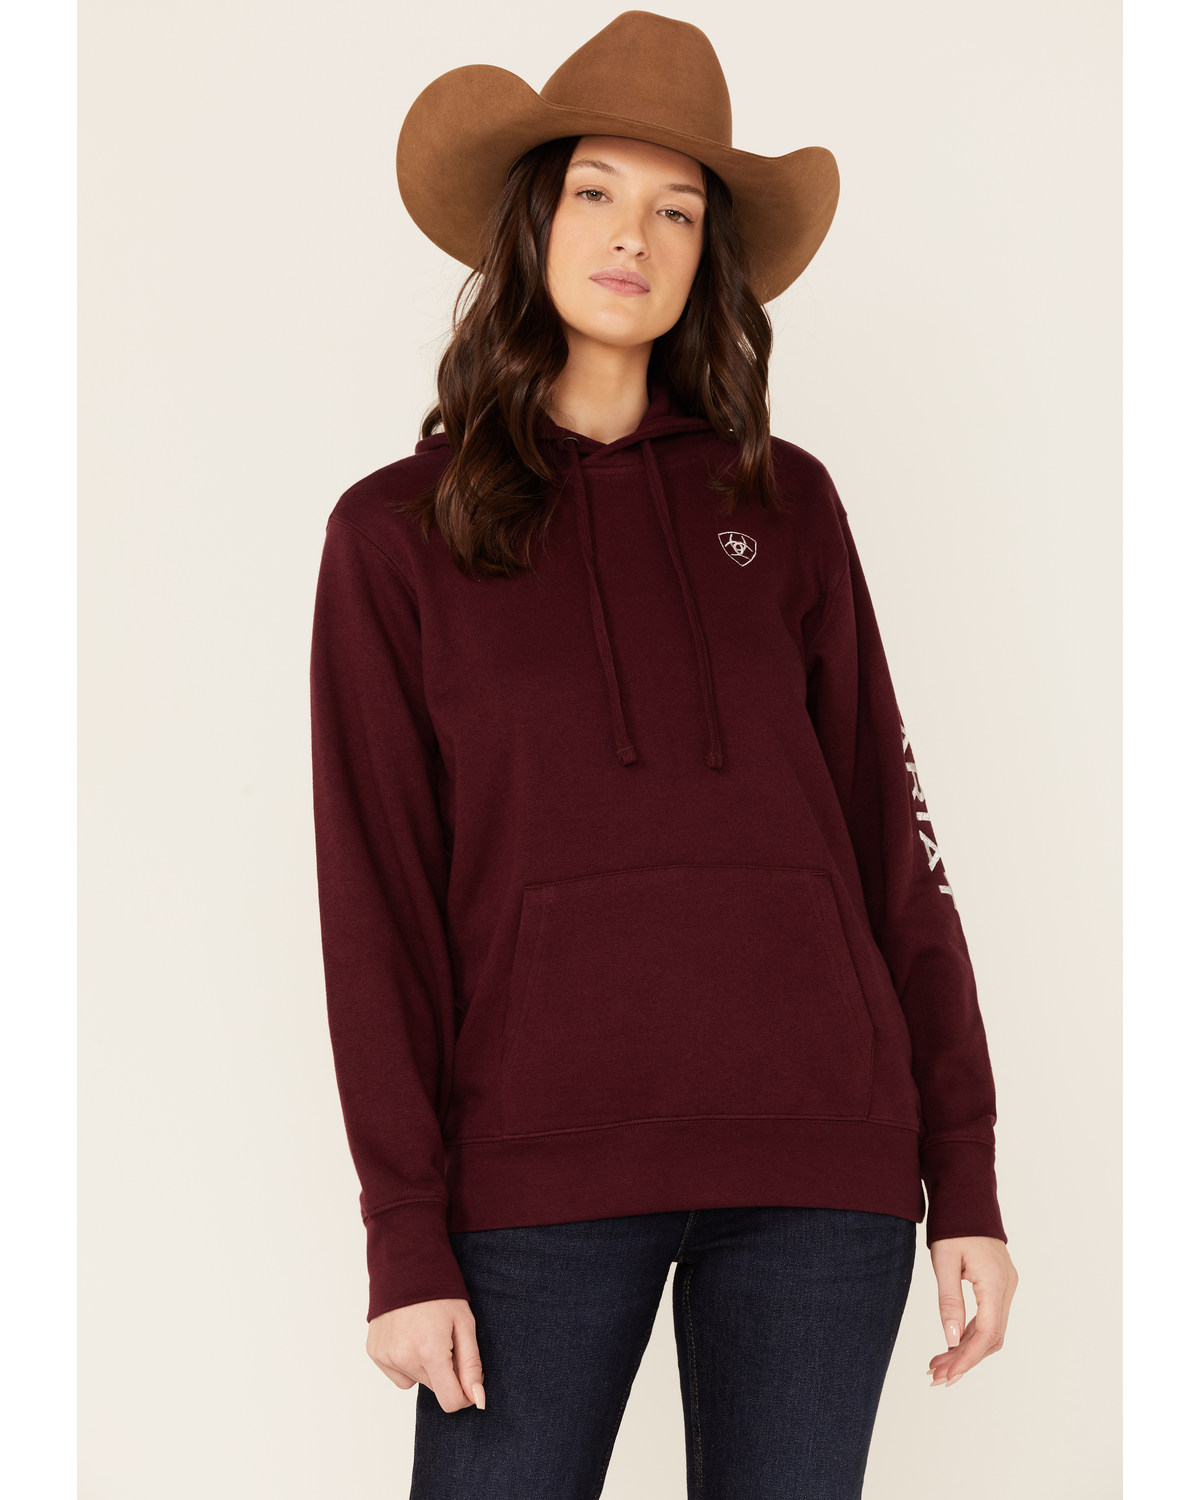 Ariat Women's Embroidered Logo Hoodie